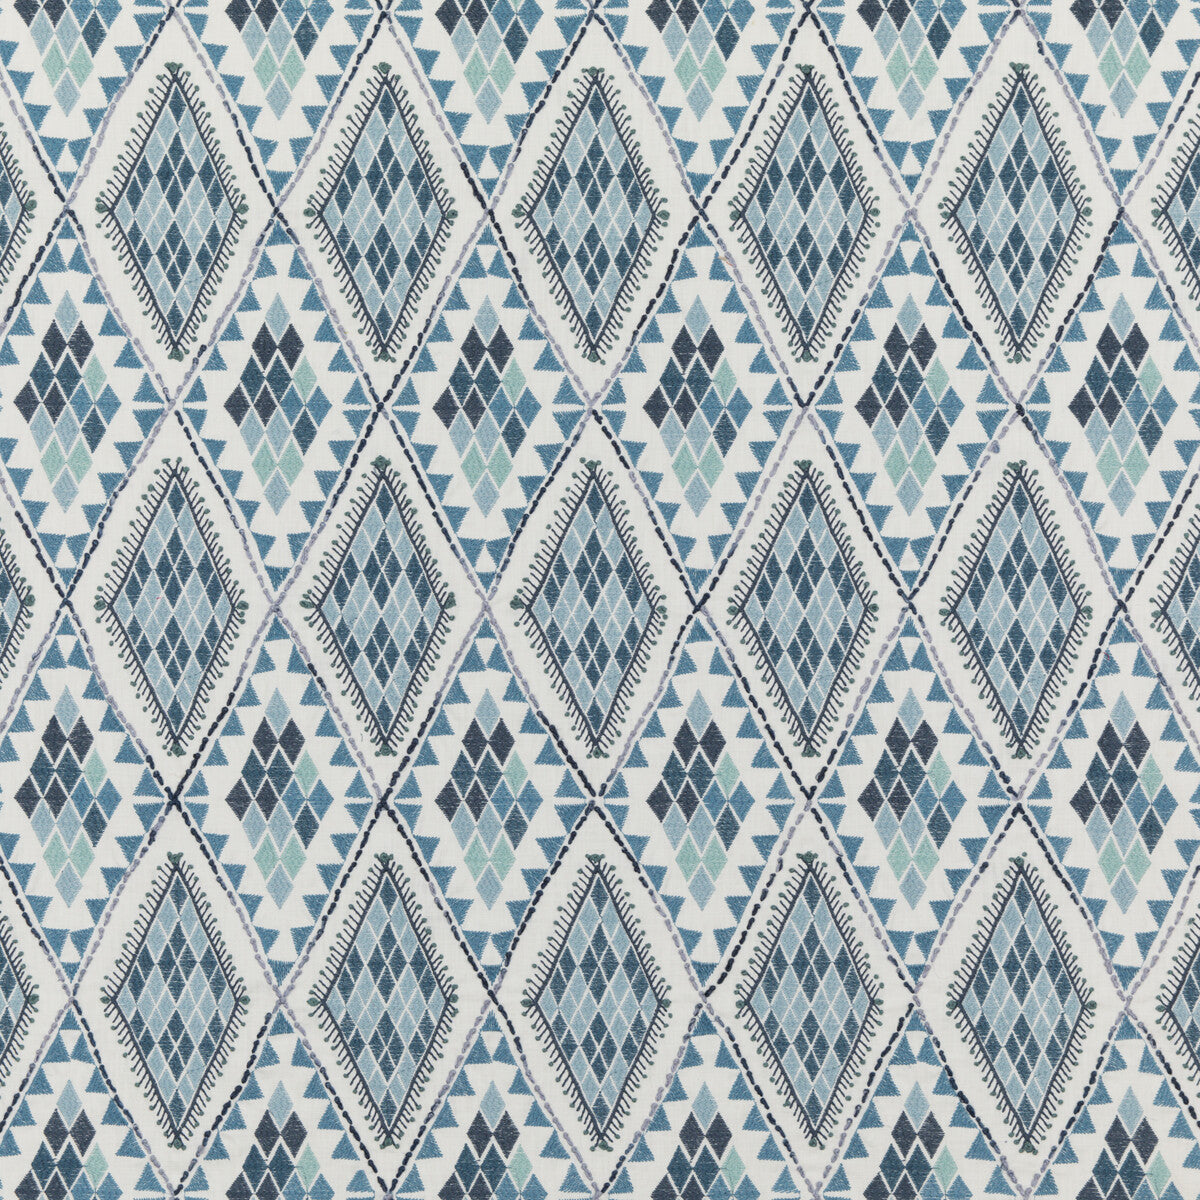 Castelo fabric in indigo color - pattern PF50443.1.0 - by Baker Lifestyle in the Homes &amp; Gardens III collection